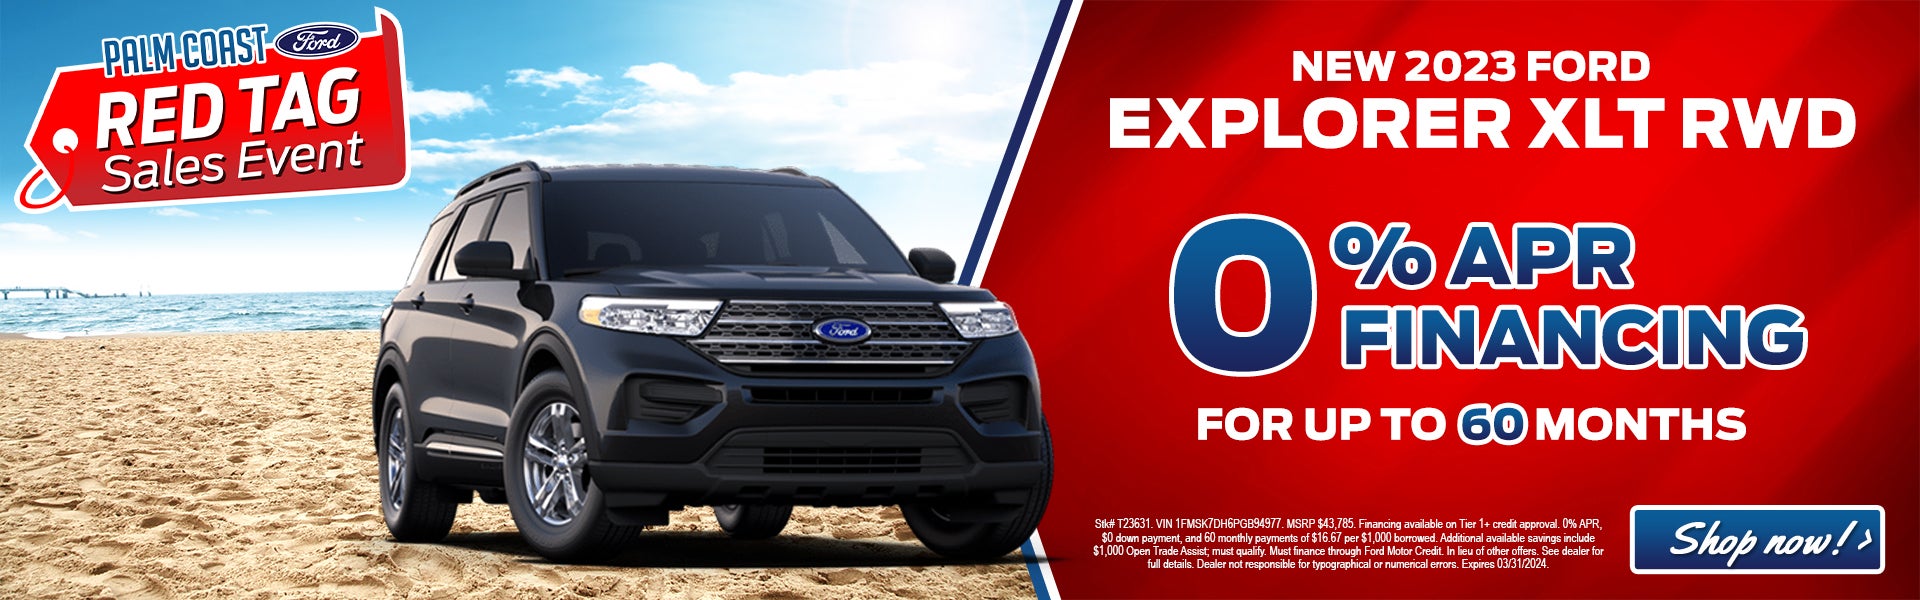 New 2023 Ford Explorer 0% APR Financing for up to 60 Months